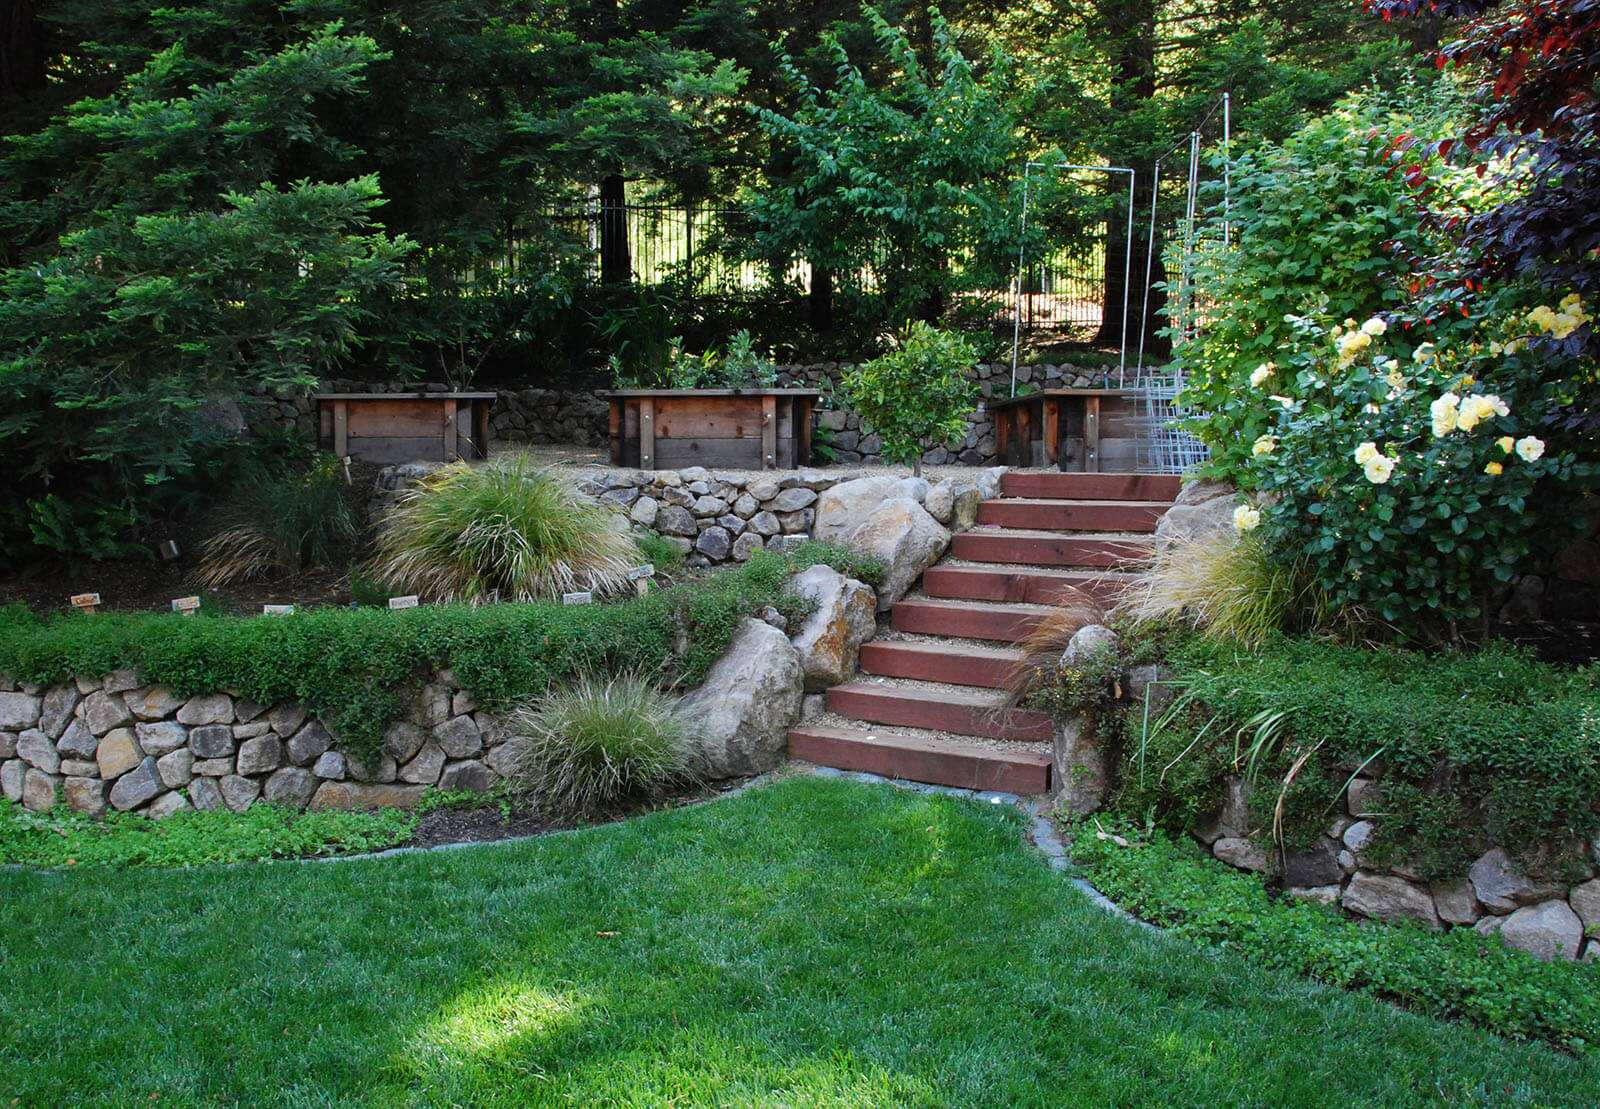 Harvest - Tree-shaded staged raised bed area with stairs